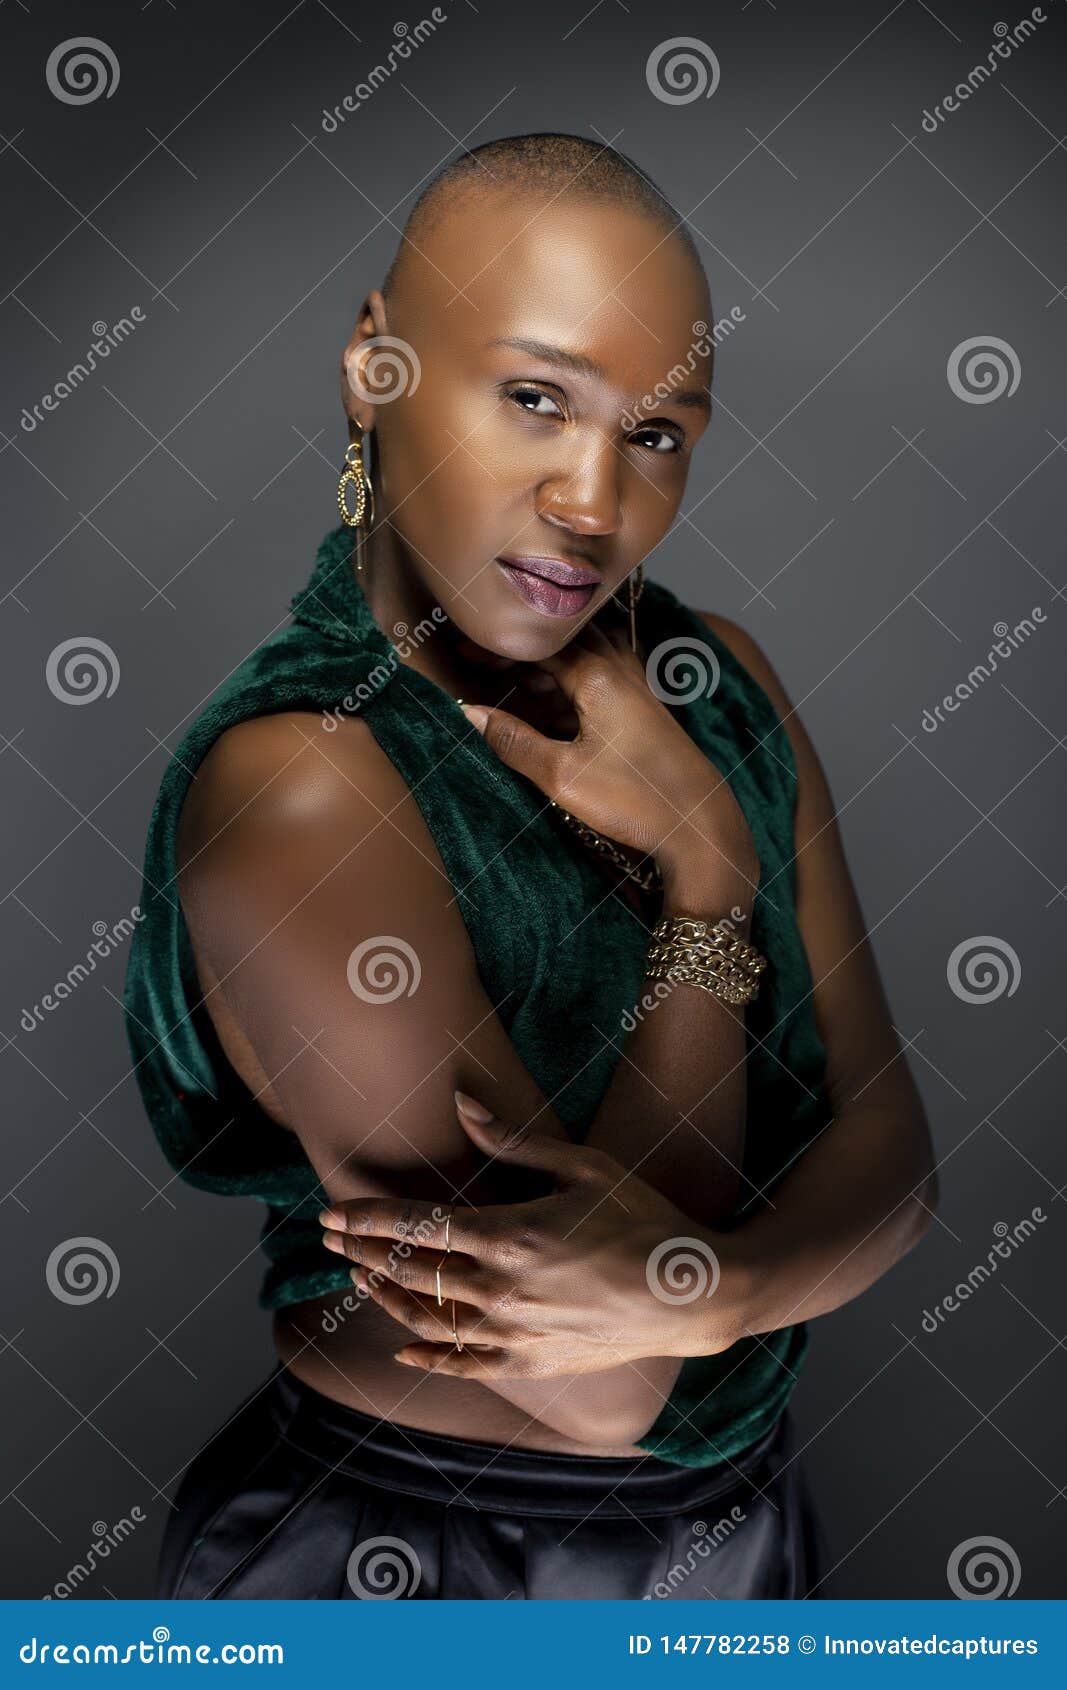 Black Female Fashion Model with Bald Hairstyle Looking Confident and Bold  Stock Photo - Image of ethnic, face: 147782258